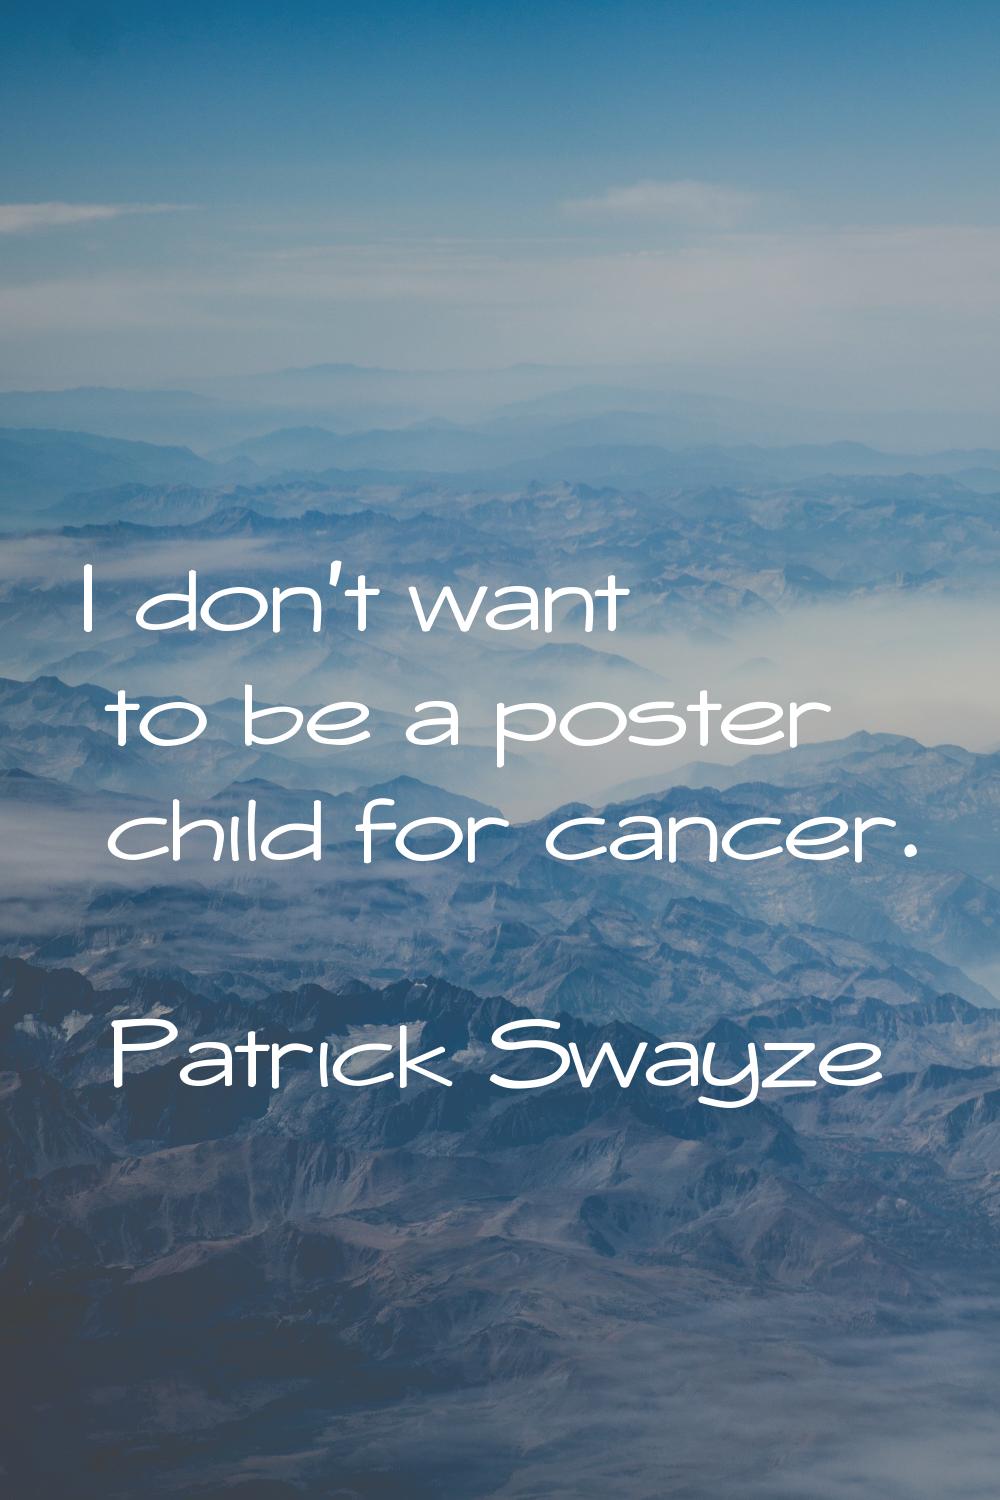 I don't want to be a poster child for cancer.